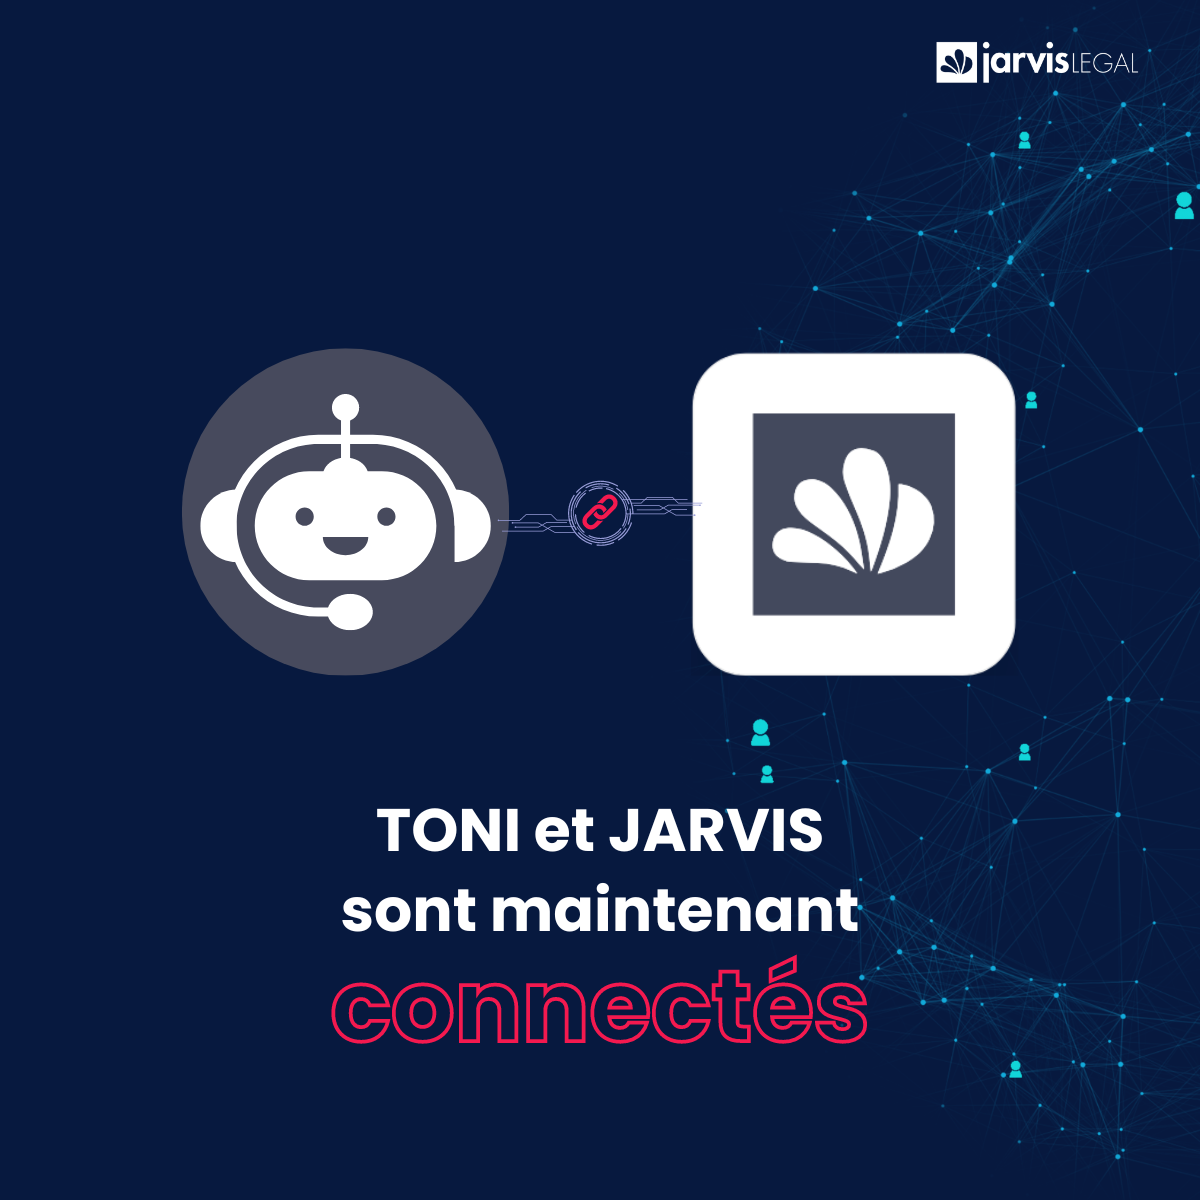 TONI and JARVIS connected